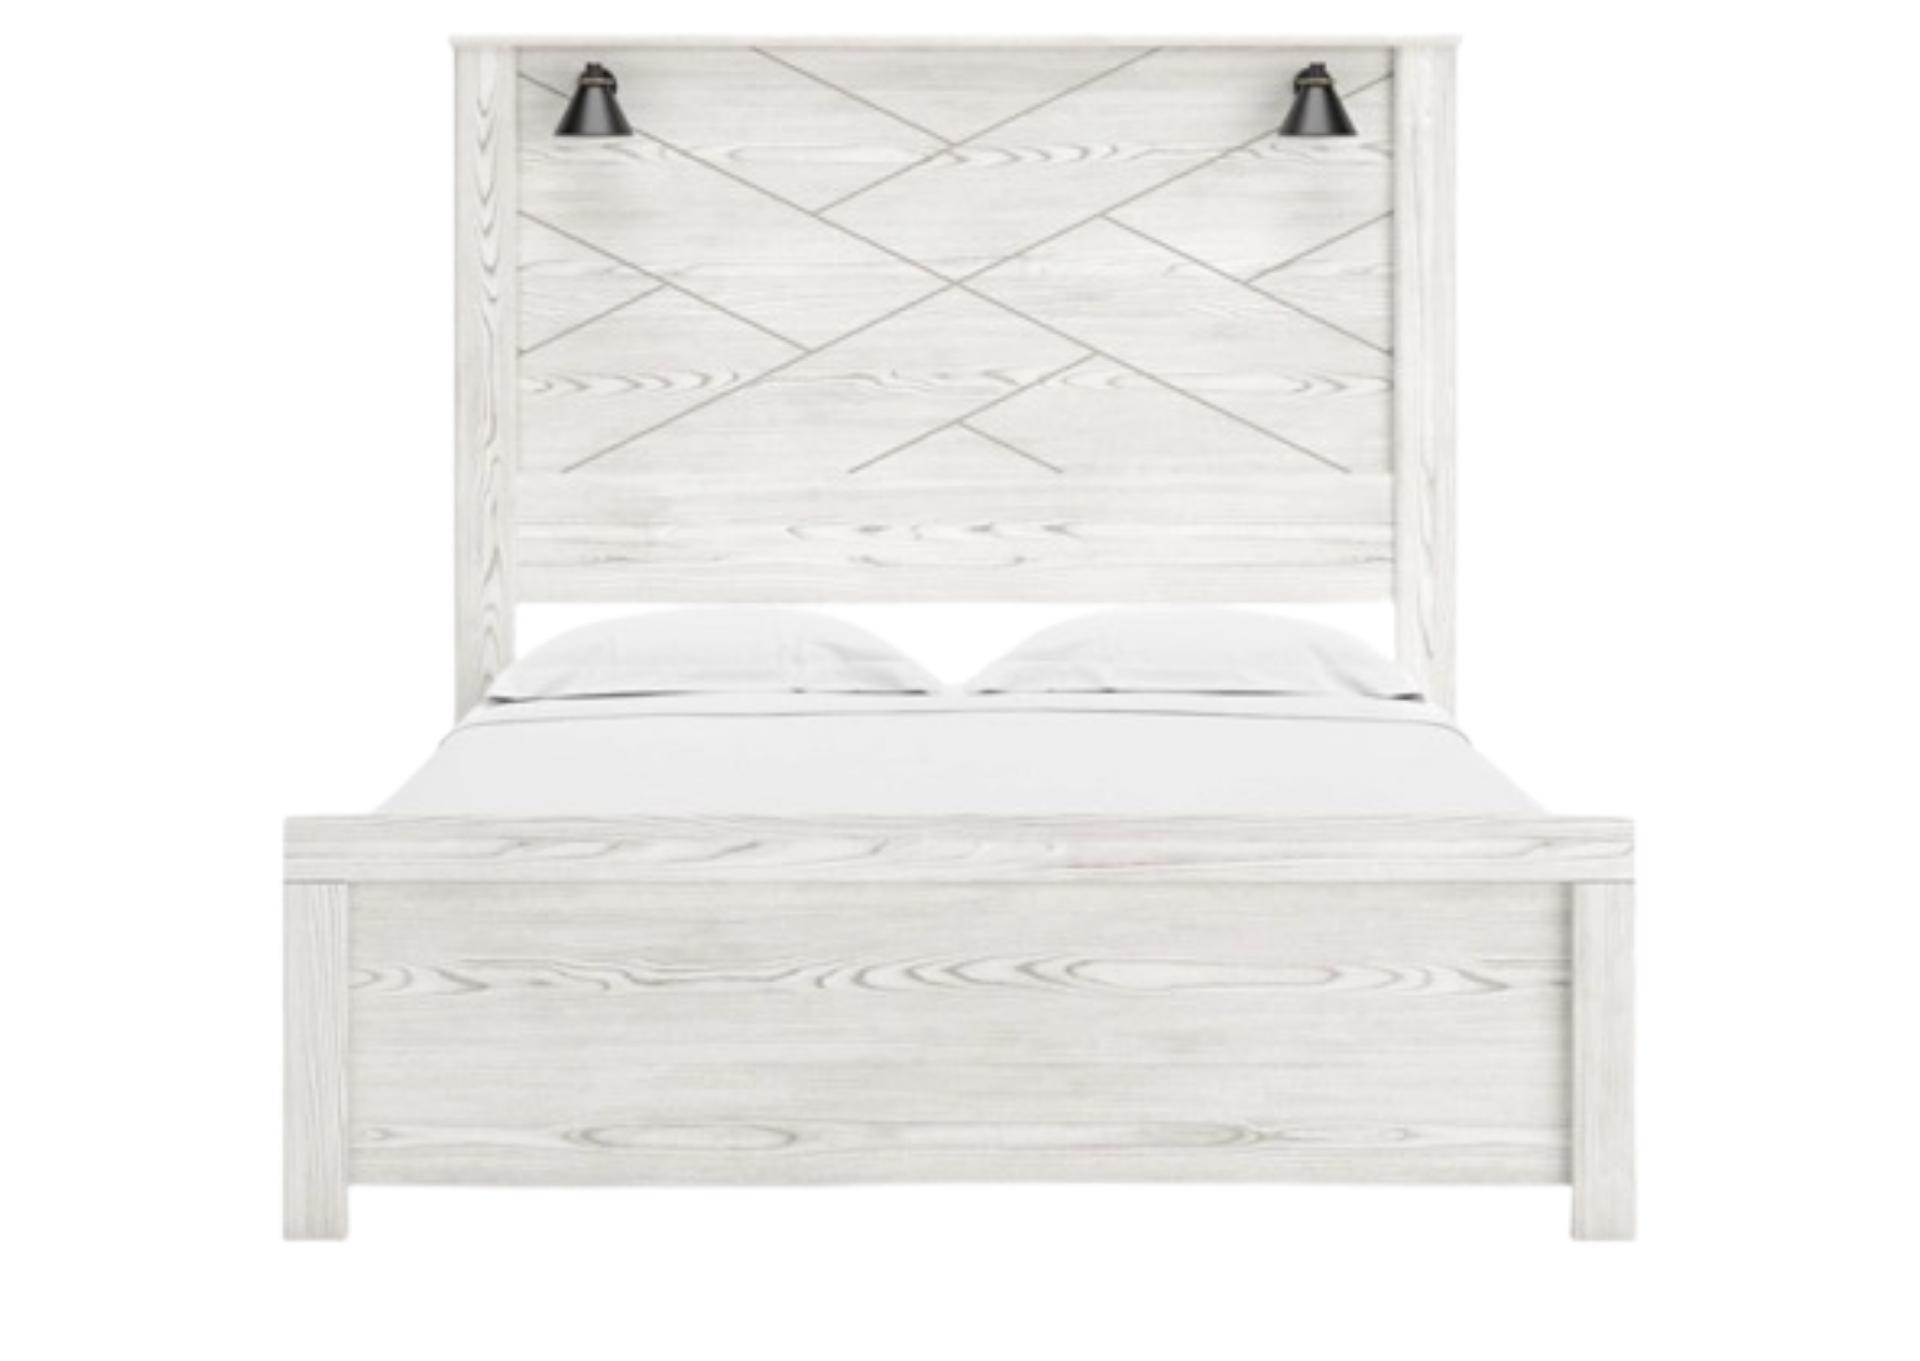 GERRIDAN QUEEN LIGHTED BED,ASHLEY FURNITURE INC.